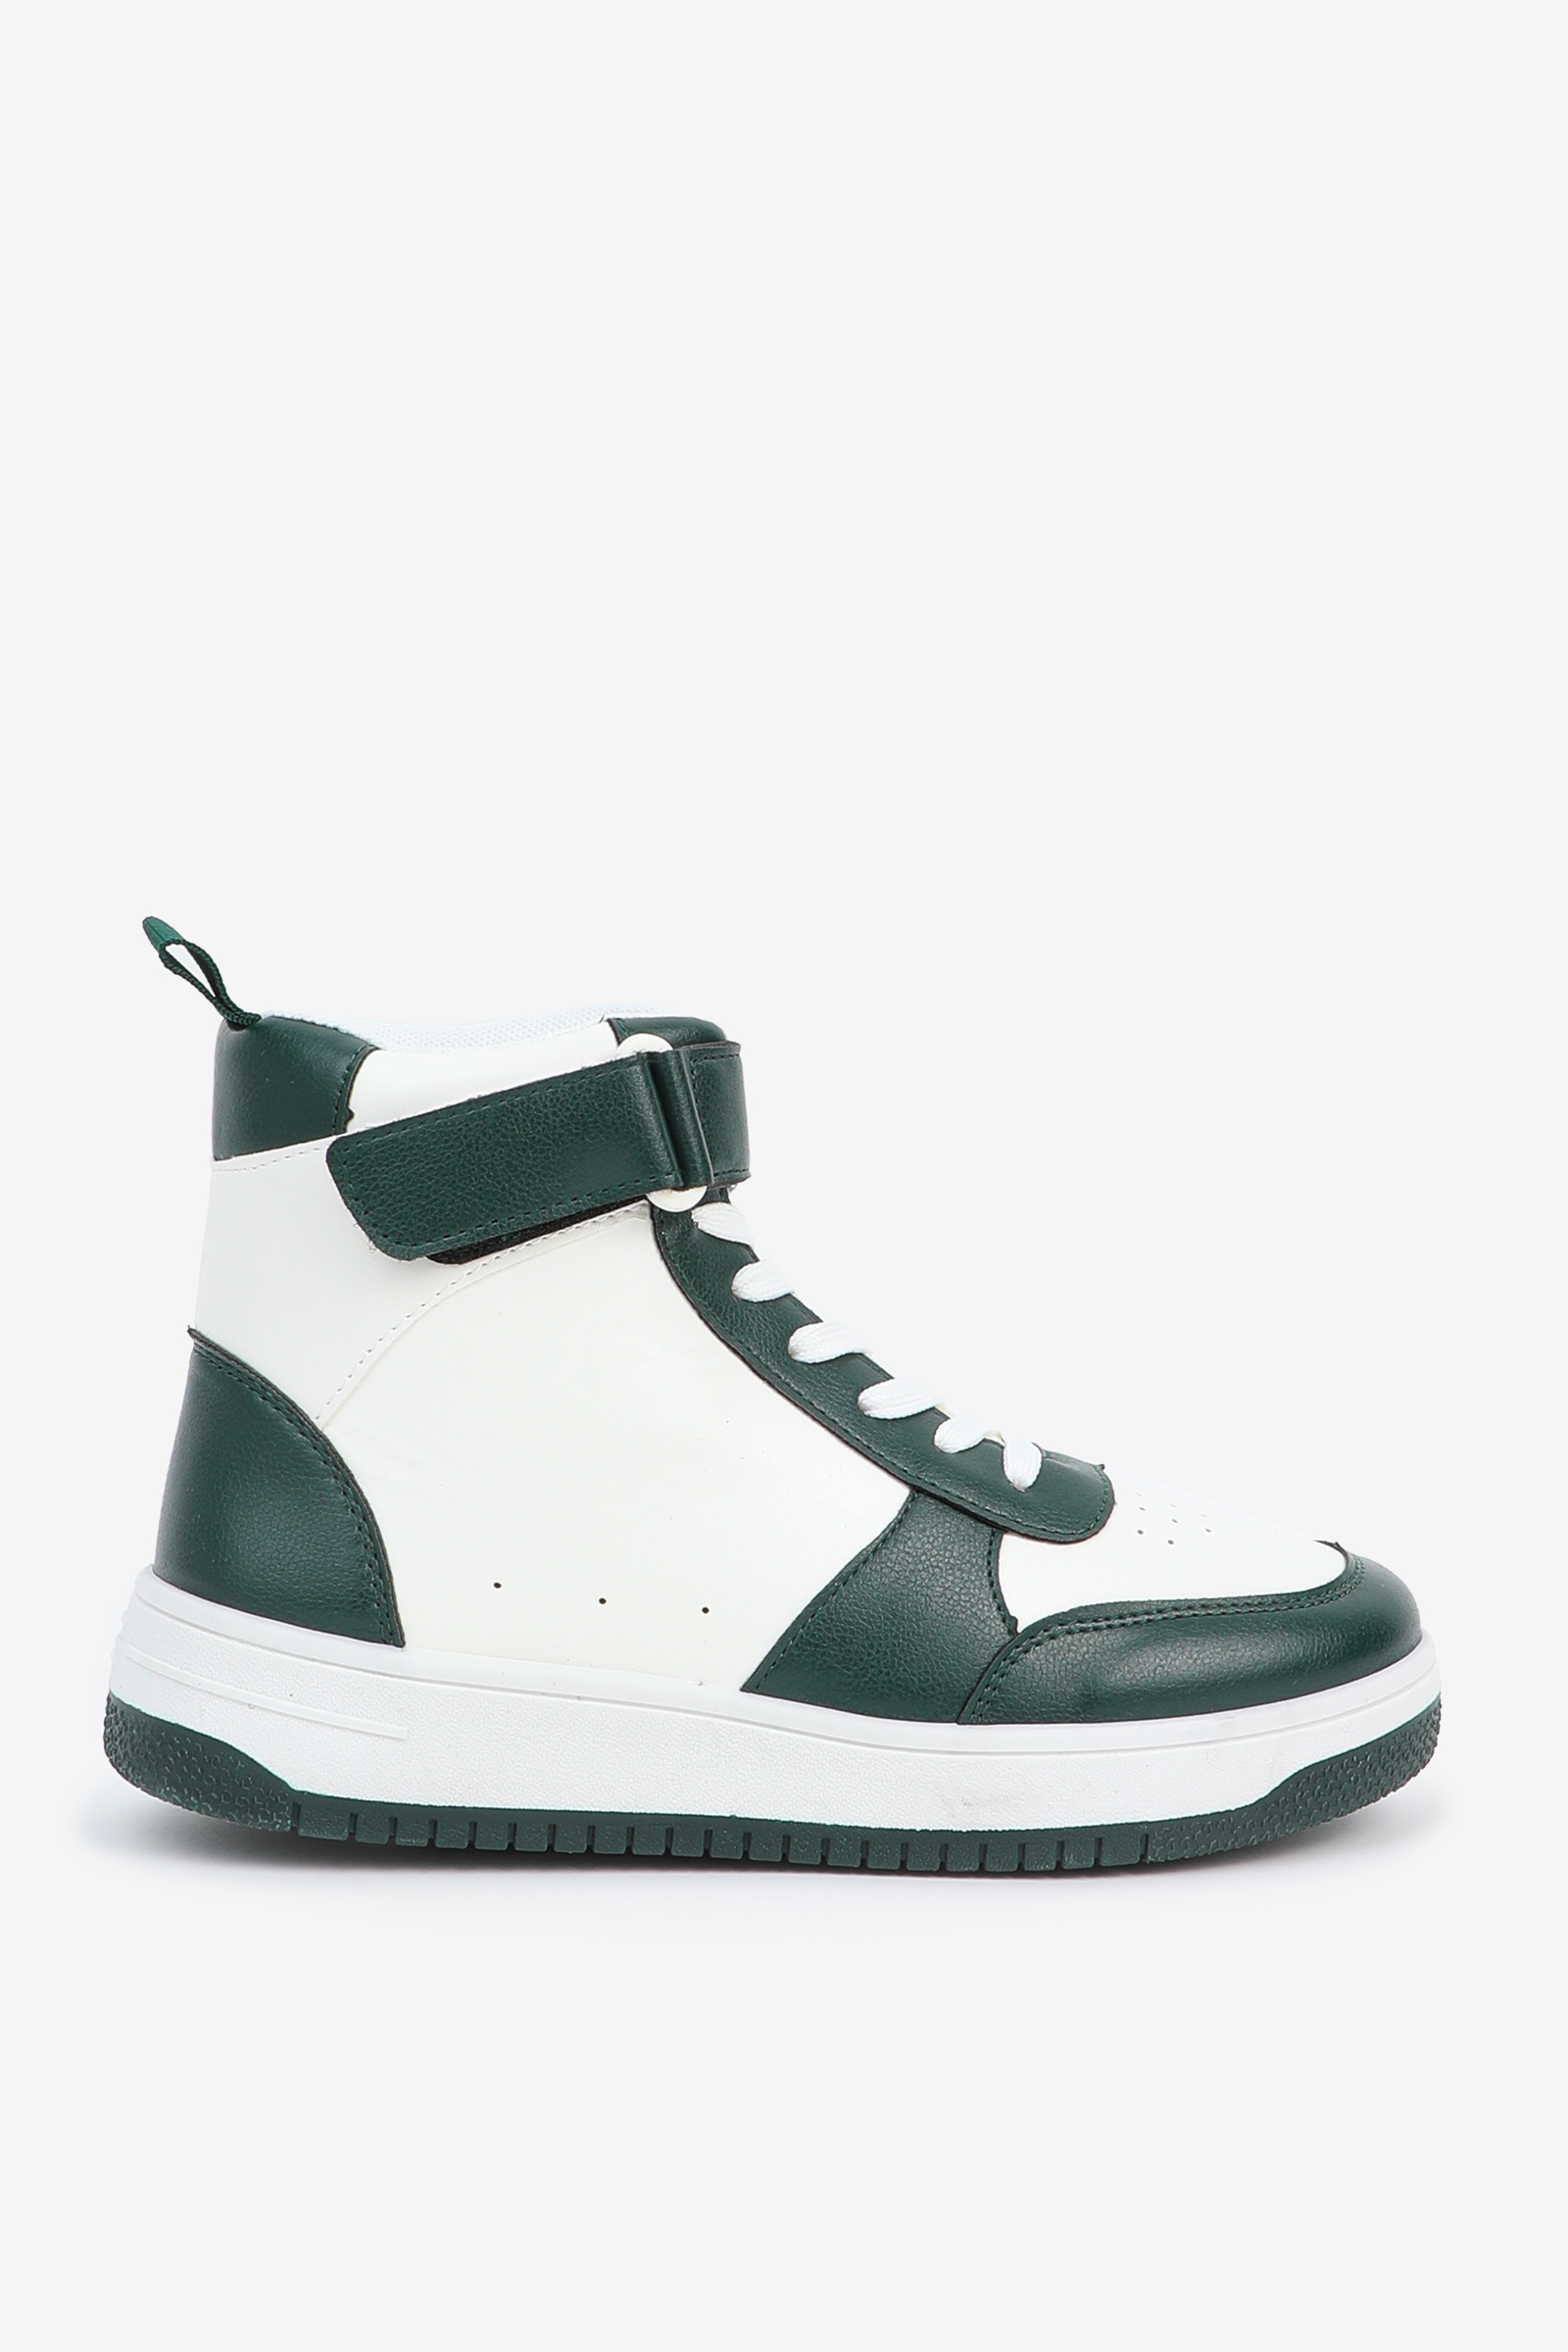 Ardene 2 Tone Faux Leather High Top Sneakers in Dark Green | Size | Faux Leather/Rubber